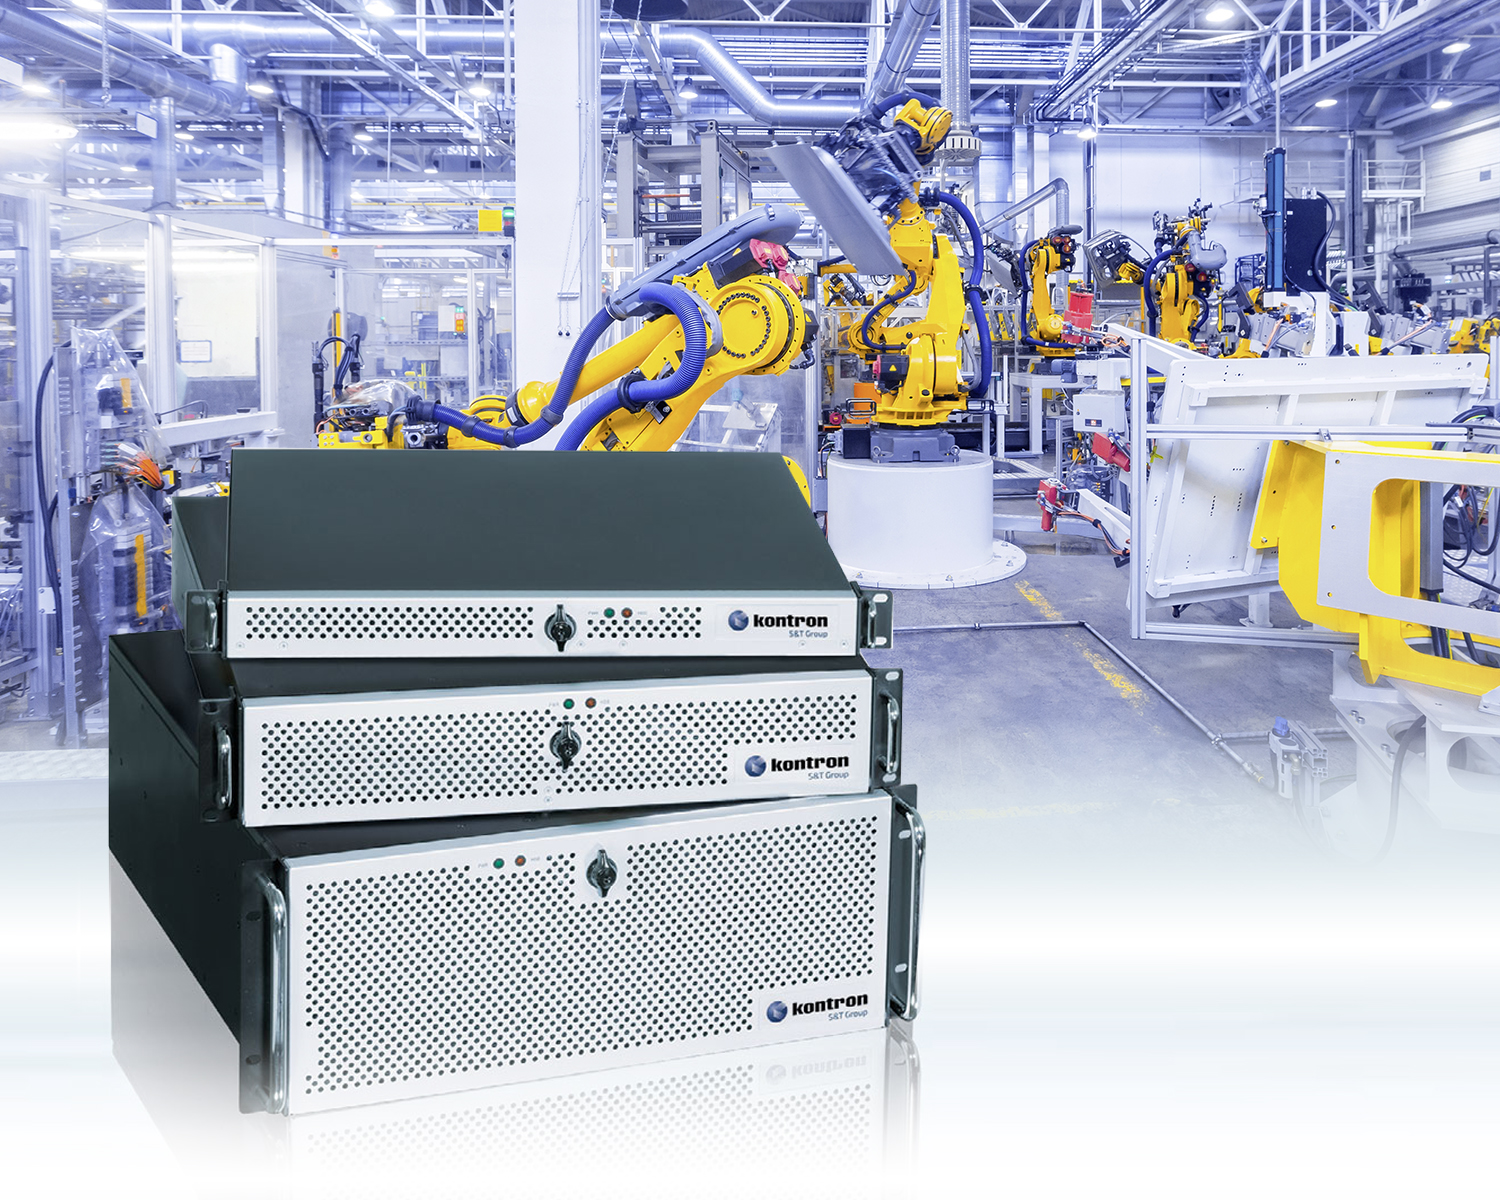 Rackmount Systems for demanding environments: Kontron’s new KISS series